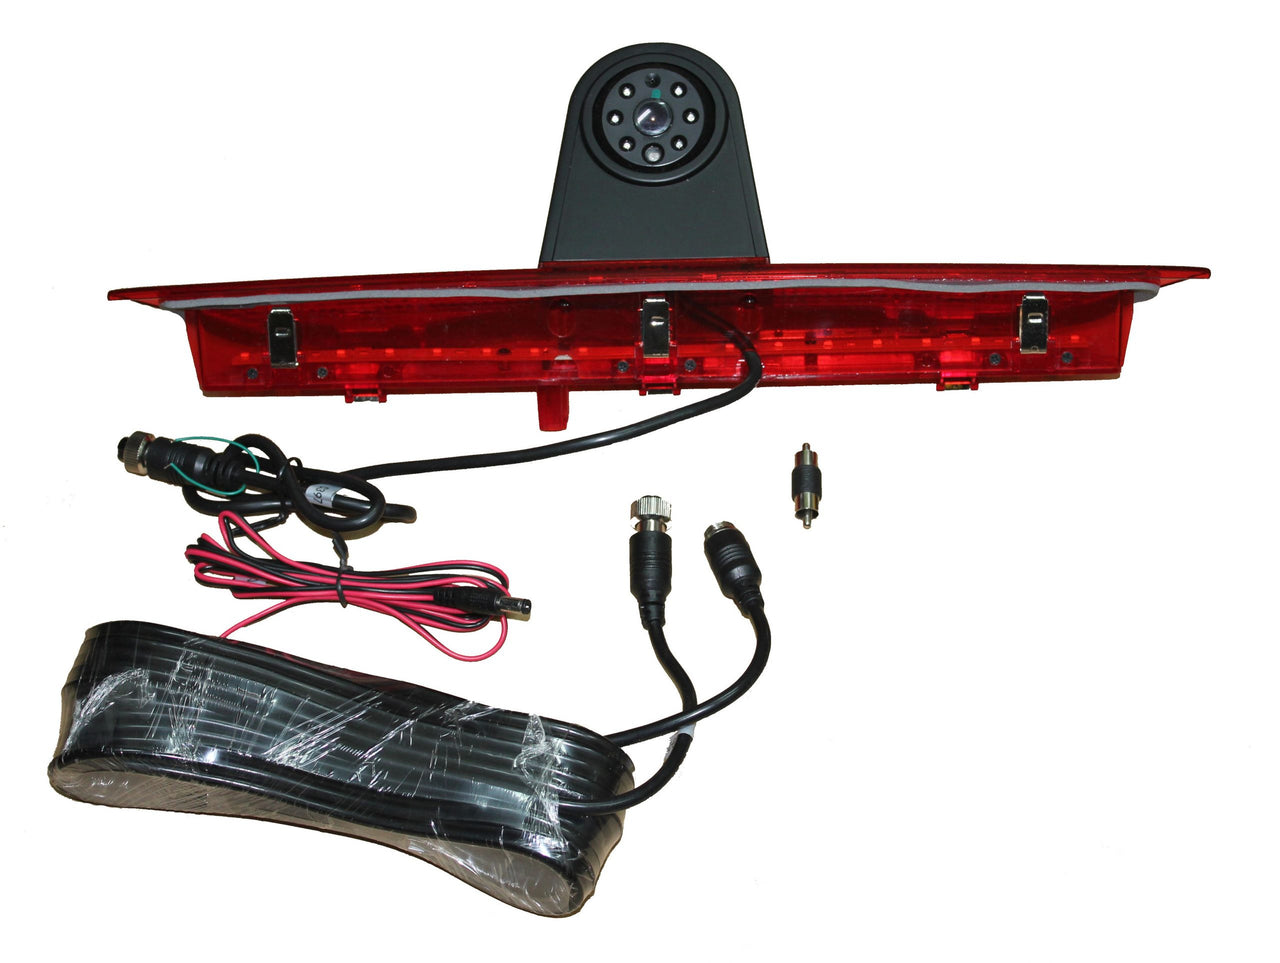 Crux CFD-05VY Third Brake Light Camera with 1/3” Sony CCD Sensor for Ford Transit Full Size Vans 2014 – 2015